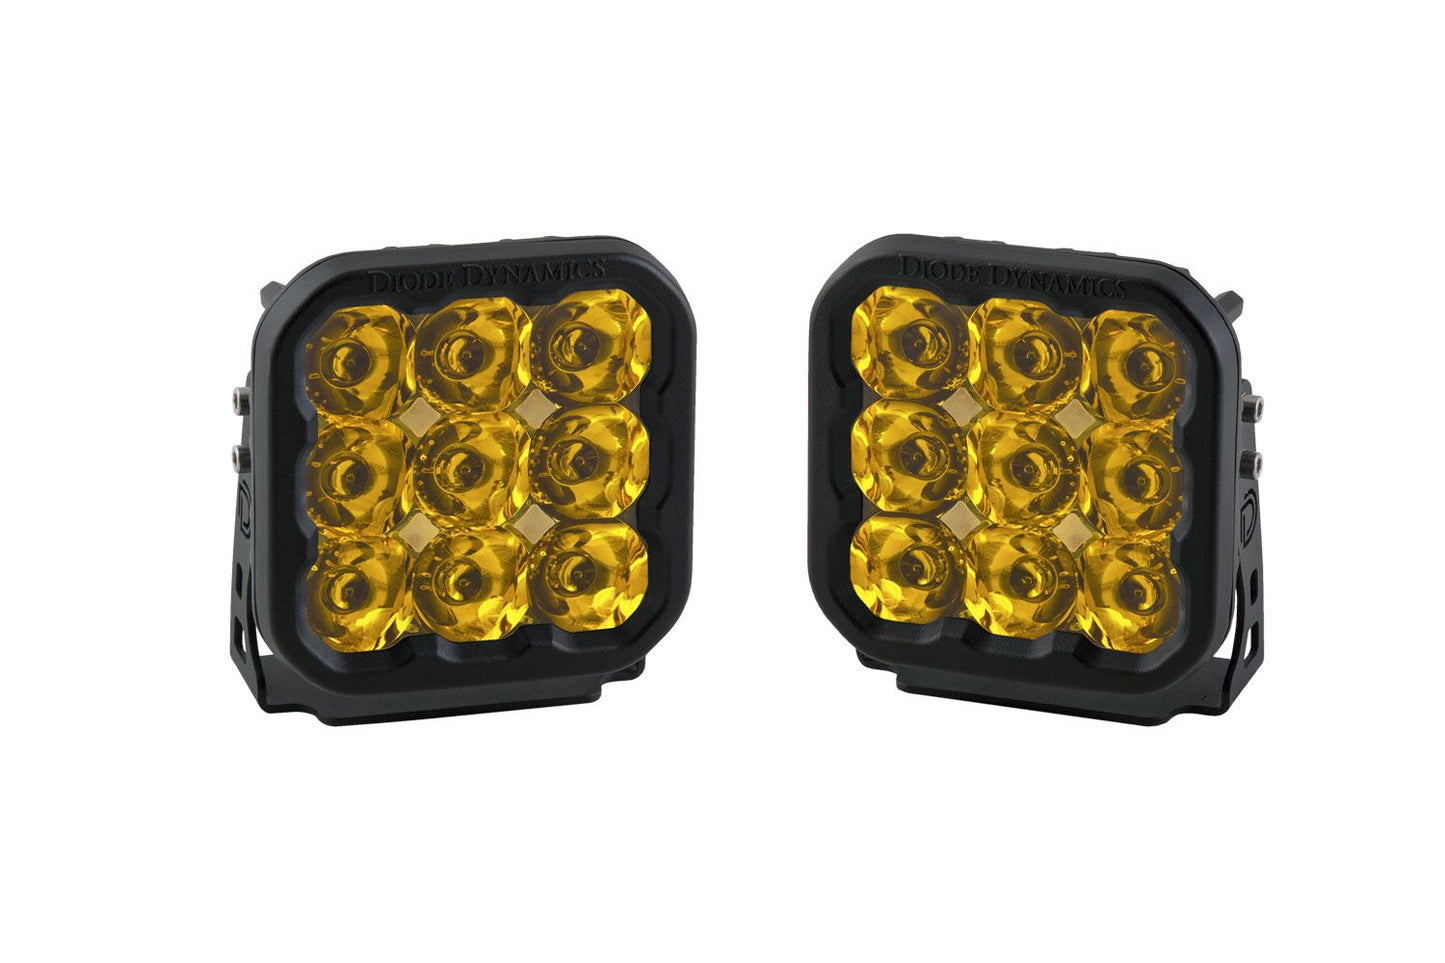 Diode Dynamics - Stage Series 5" Amber LED Pod